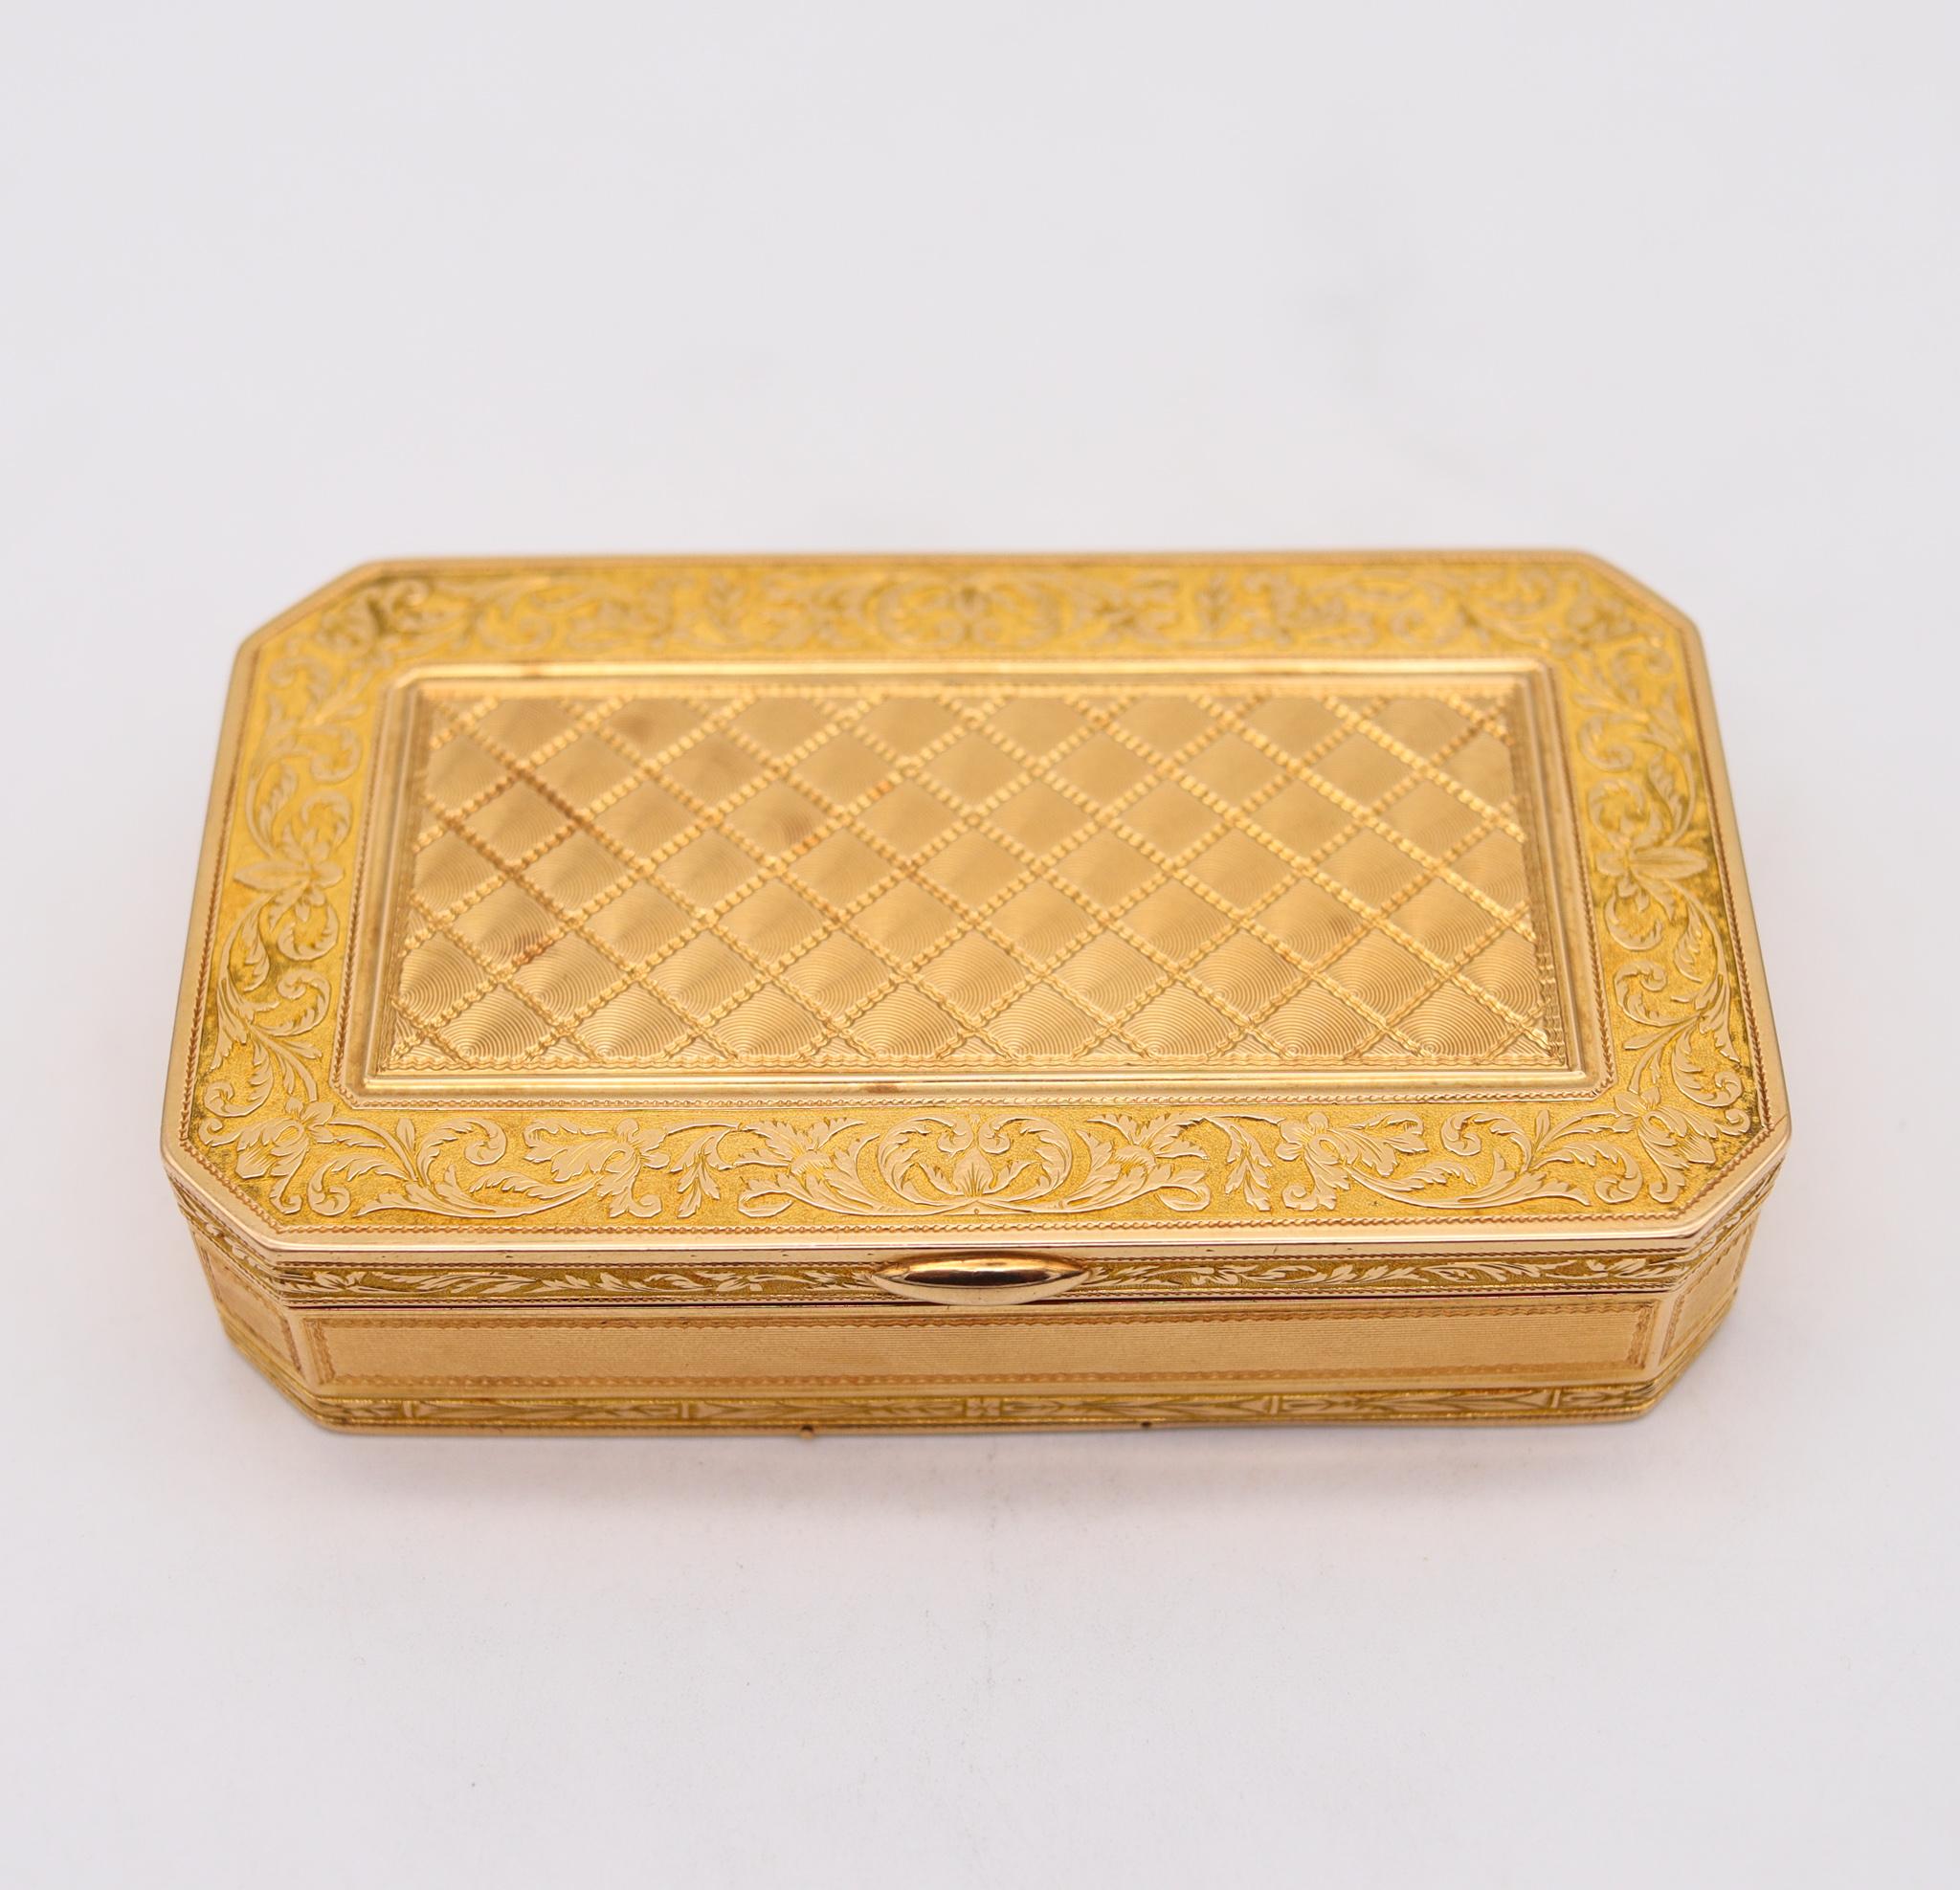 French snuff box in solid gold.

Exceptional rectangular snuff box, crafted in Paris France during the second monarchic restoration period, between the 1818 and 1838. It was carefully crafted in the neoclassical Louis XVI style in solid yellow gold